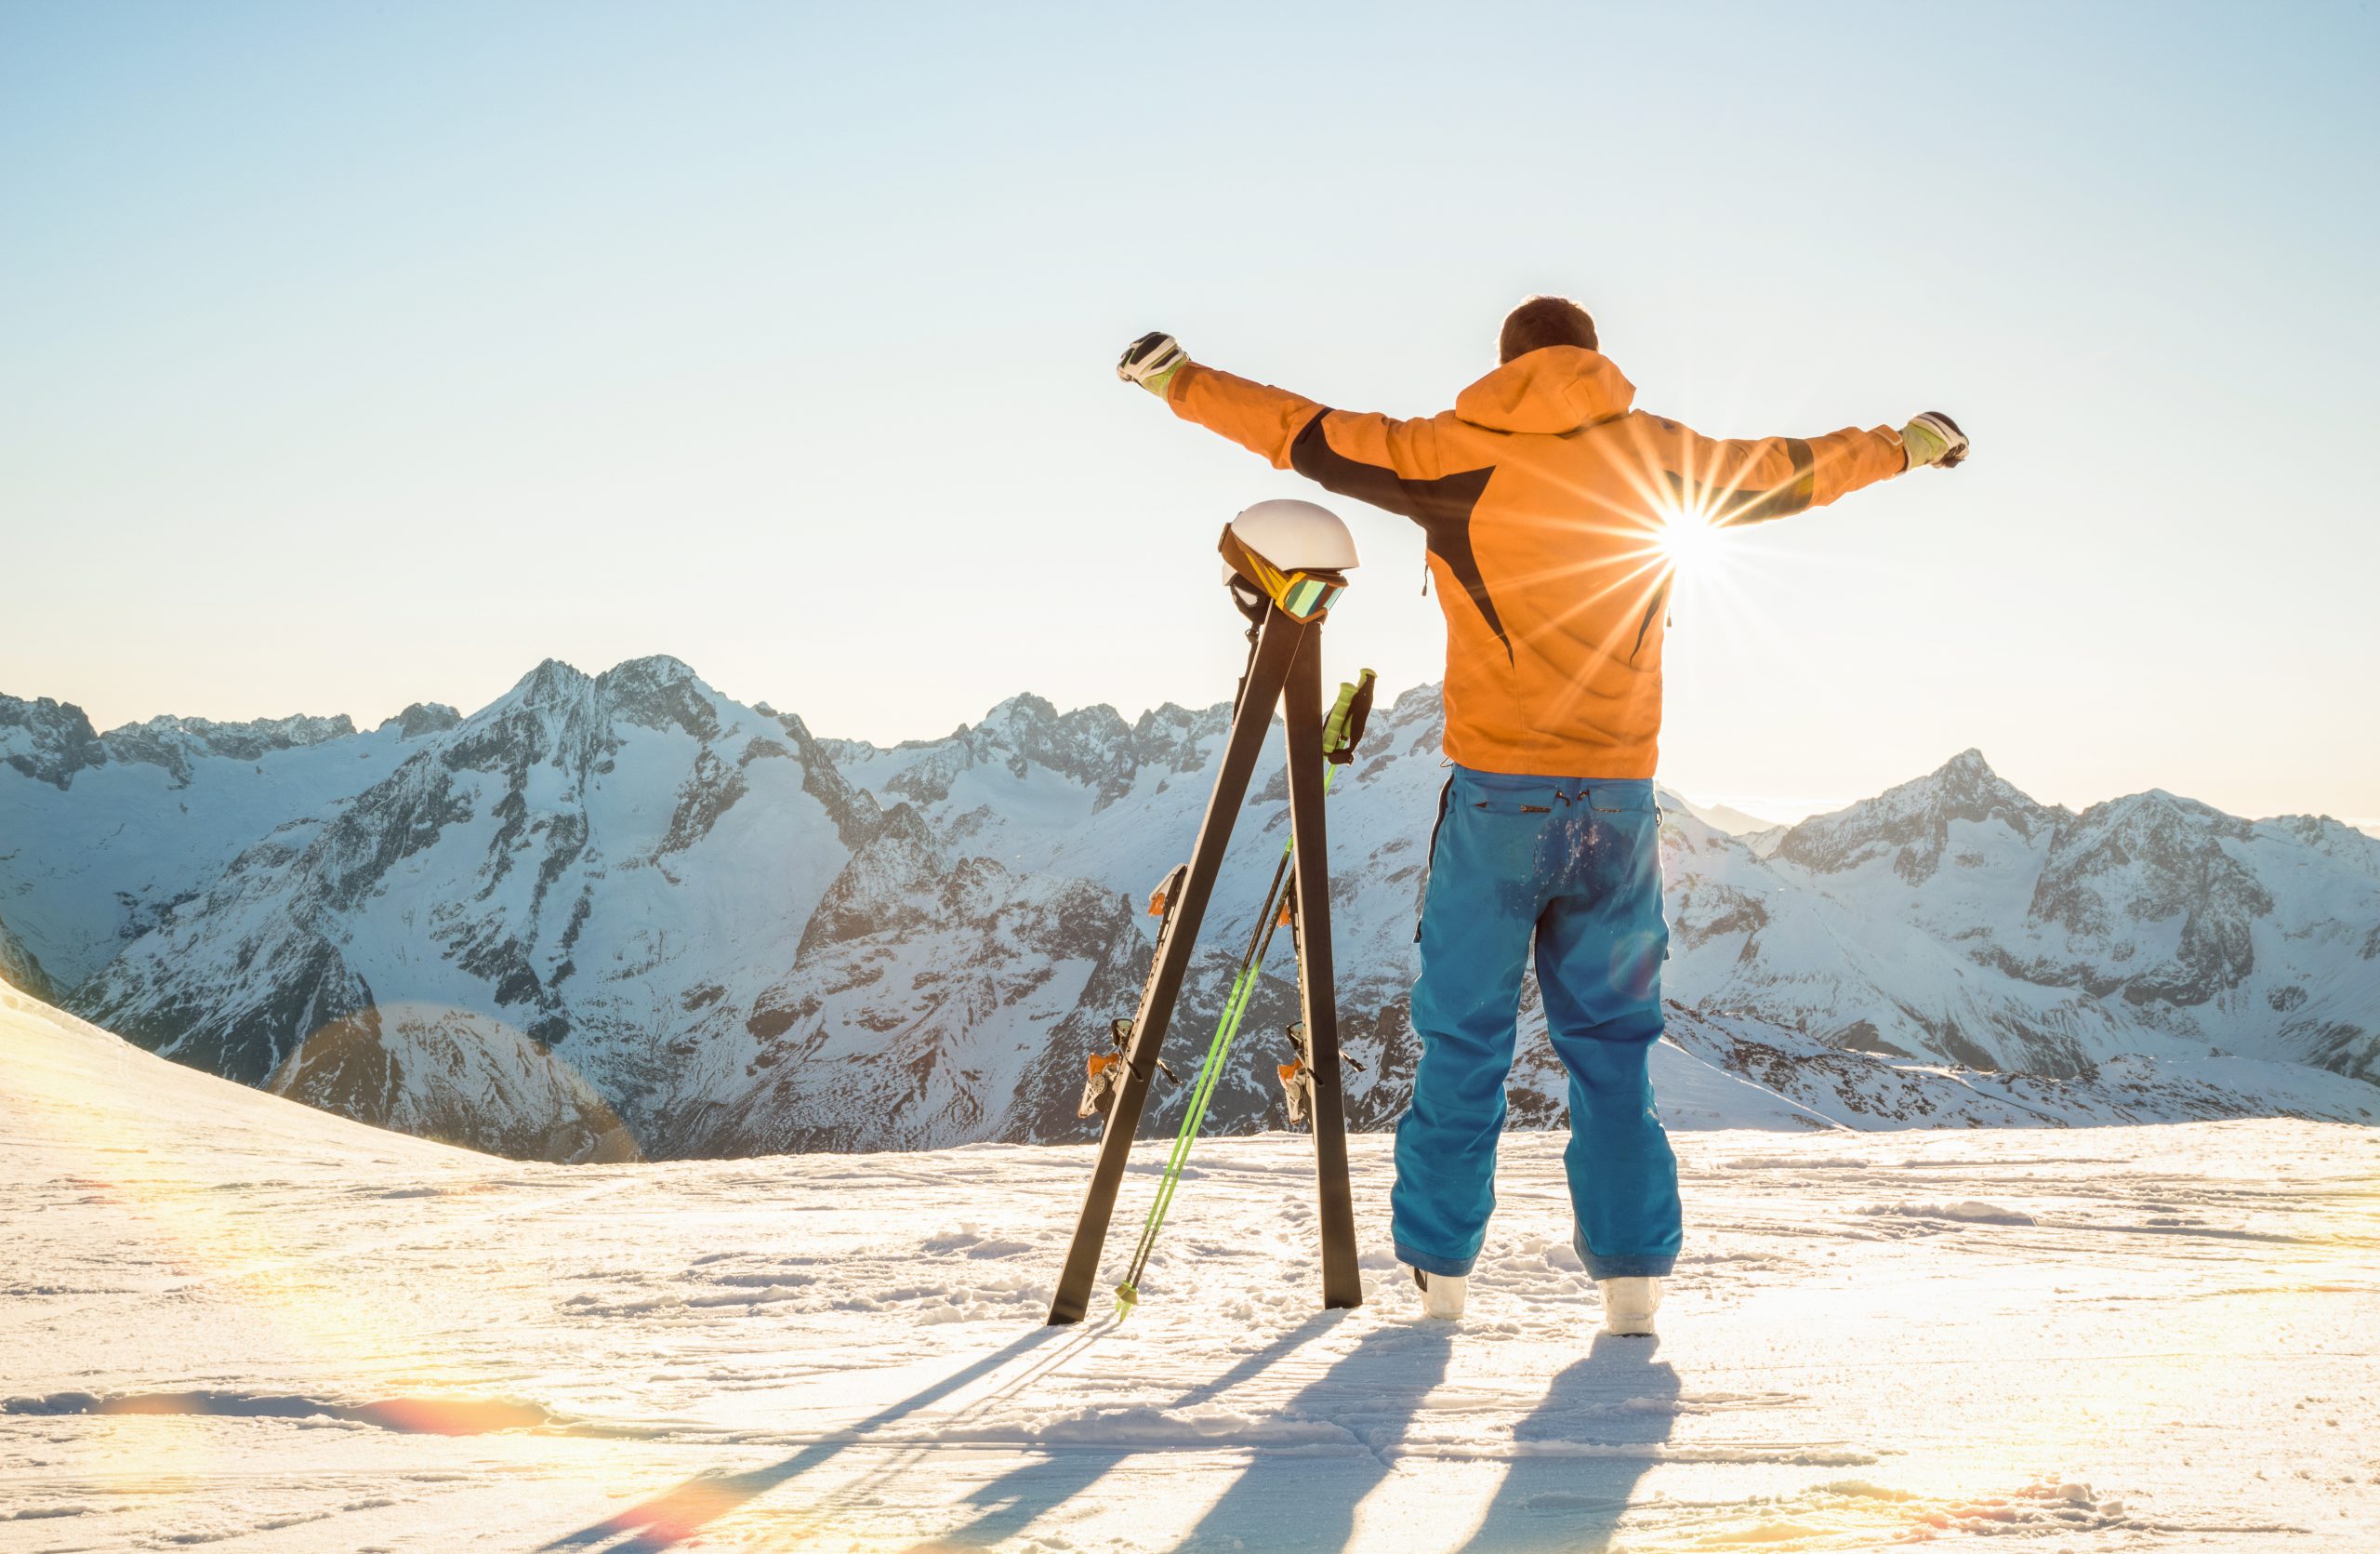 Young professional skier at sunset on relax moment in french alps ski resort - Winter sport concept with adventure guy on mountain top ready to ride down - Backlight view point with bright warm filter